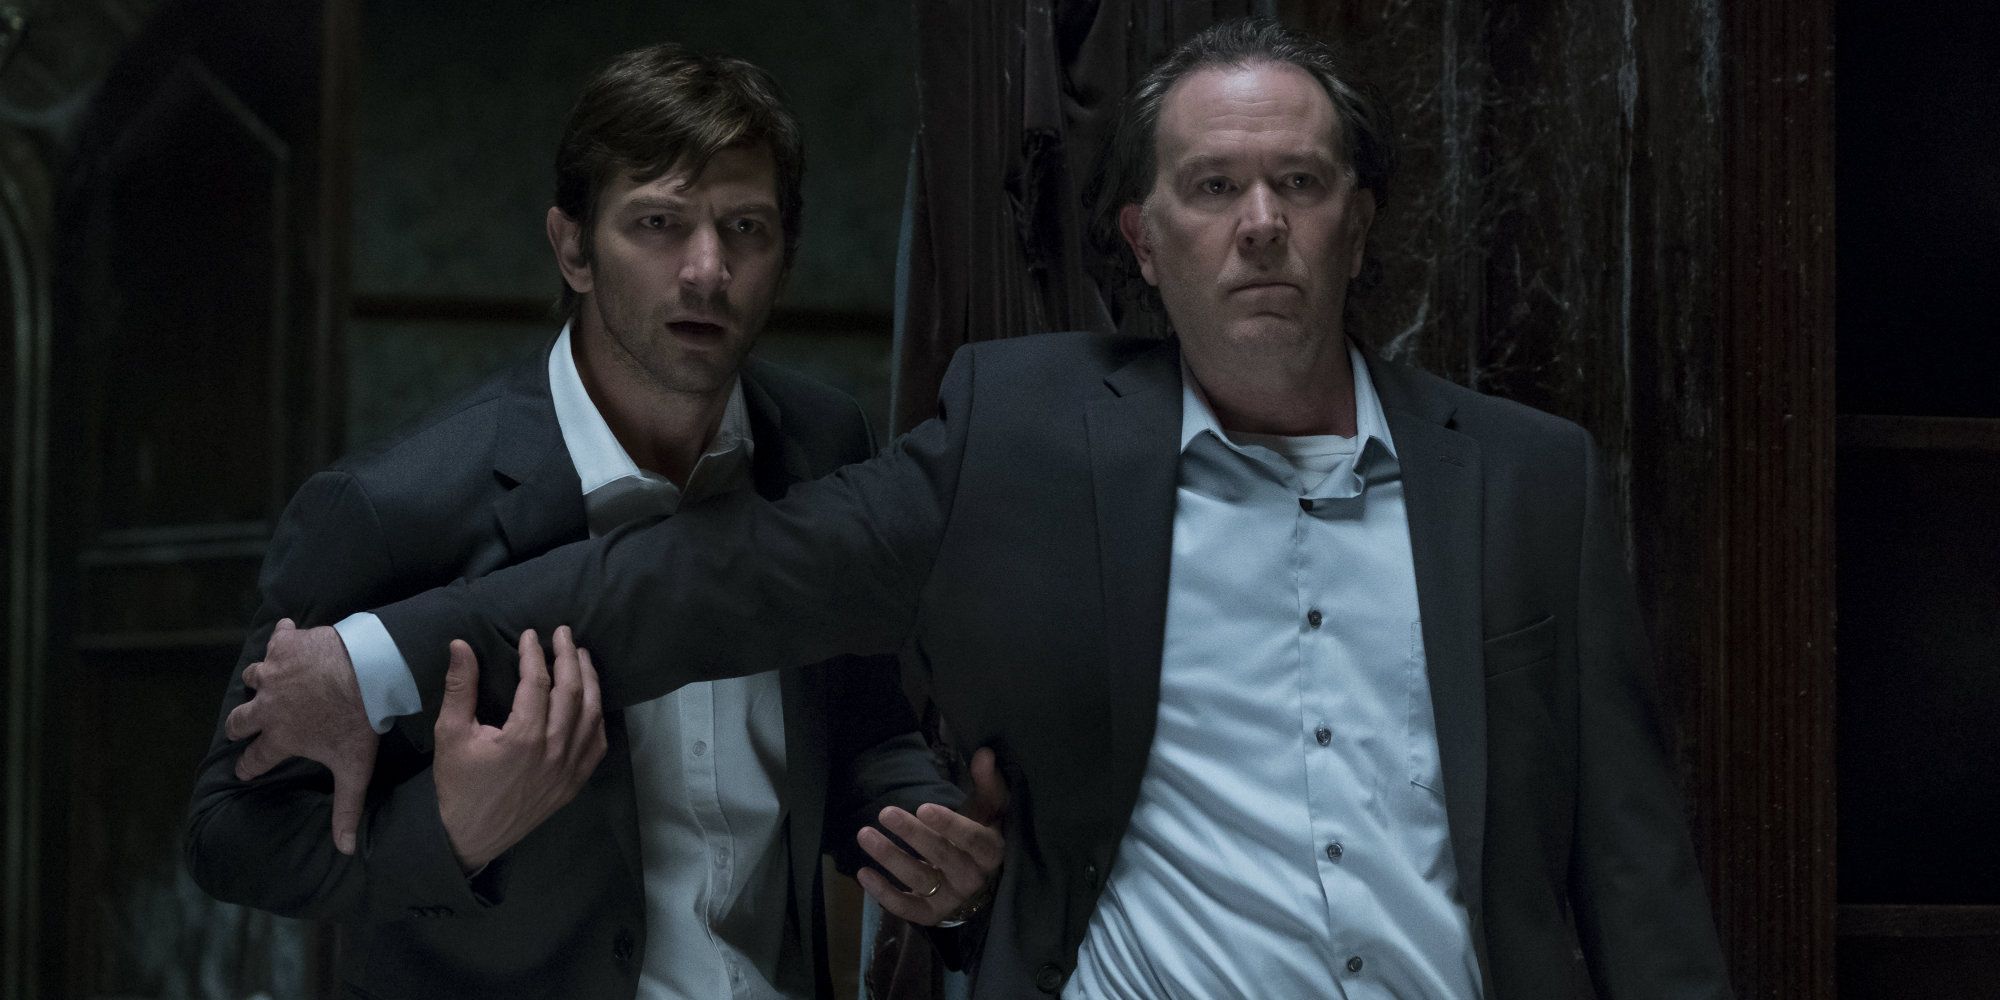 The Haunting of Hill House: Every Crain, Ranked By Intelligence